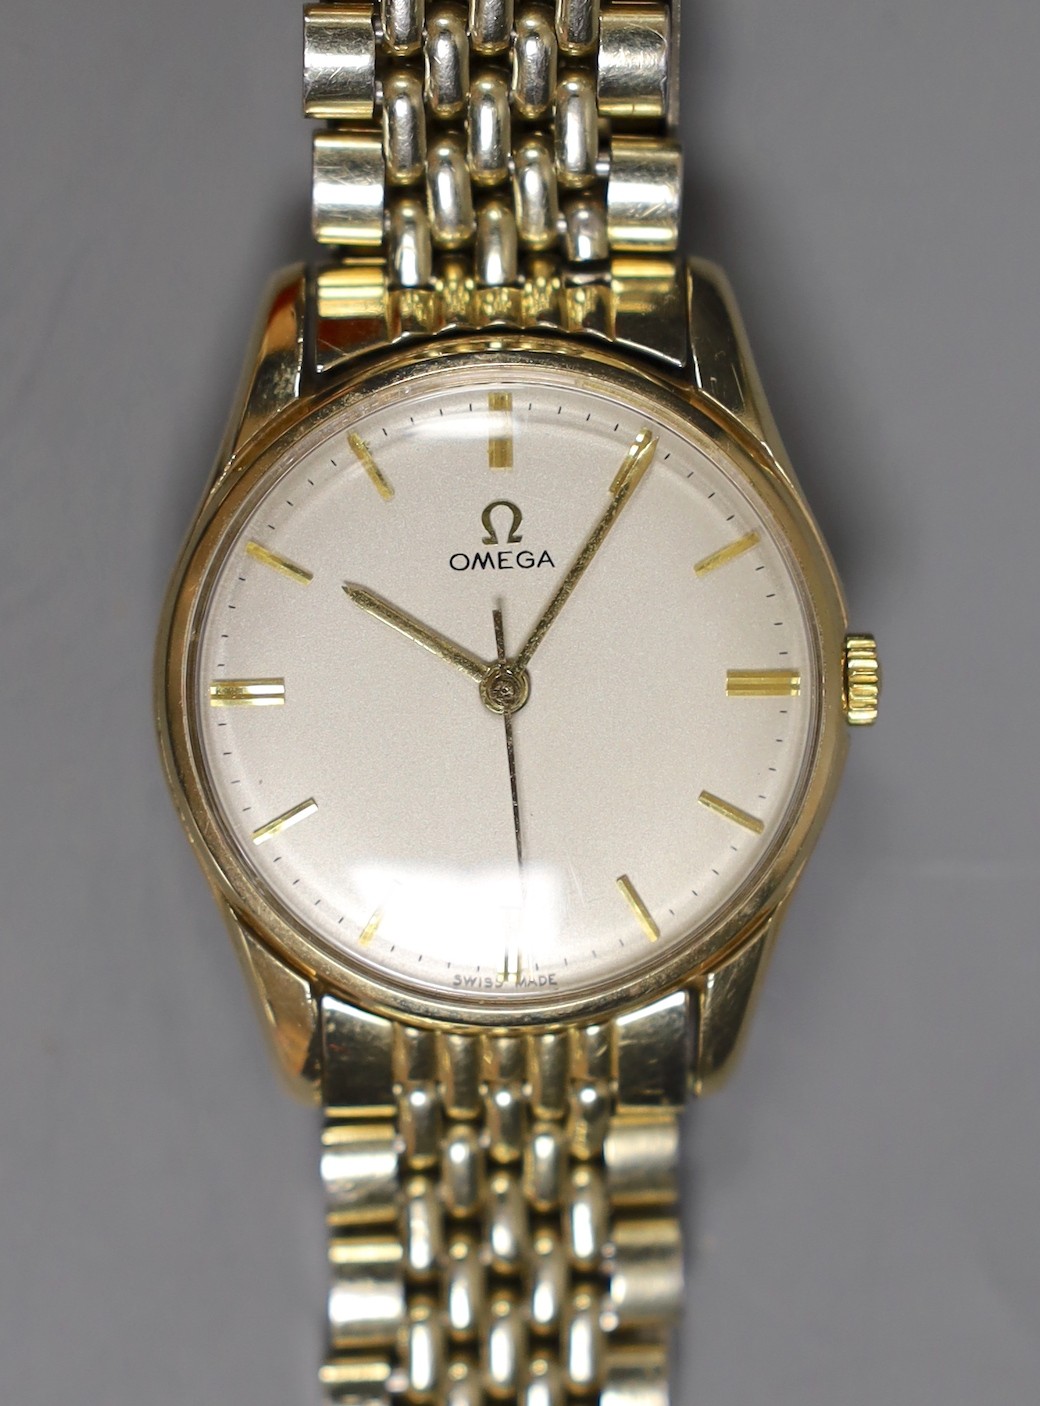 A gentleman's 9ct gold Omega manual wind wrist watch, on an Omega steel and gold plated bracelet, with box and pamphlets.